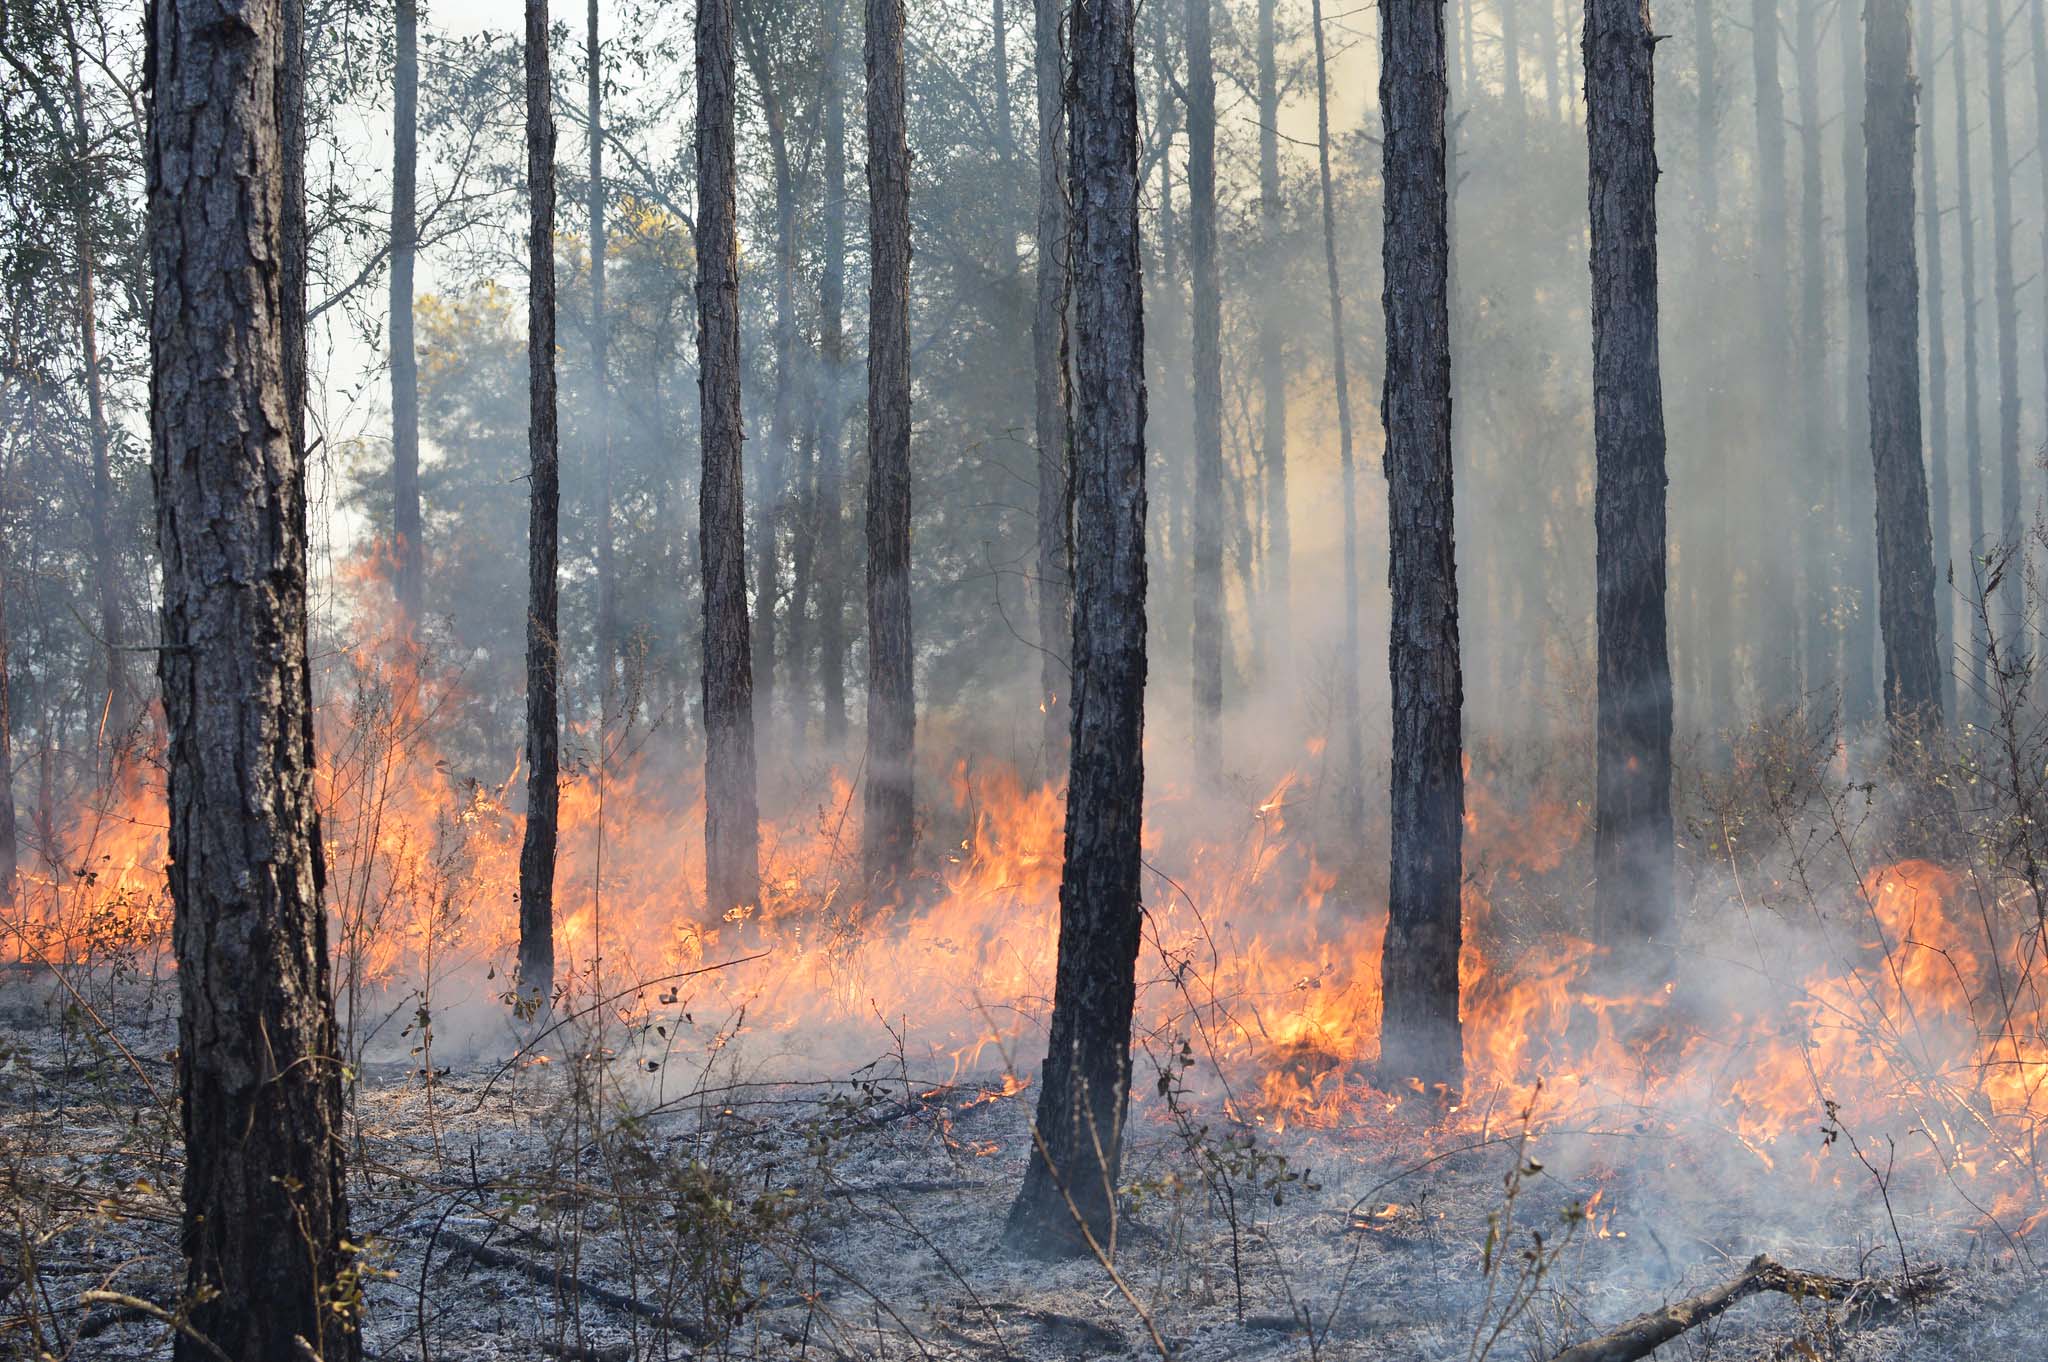 A forested area with a strip of orange flames along the ground